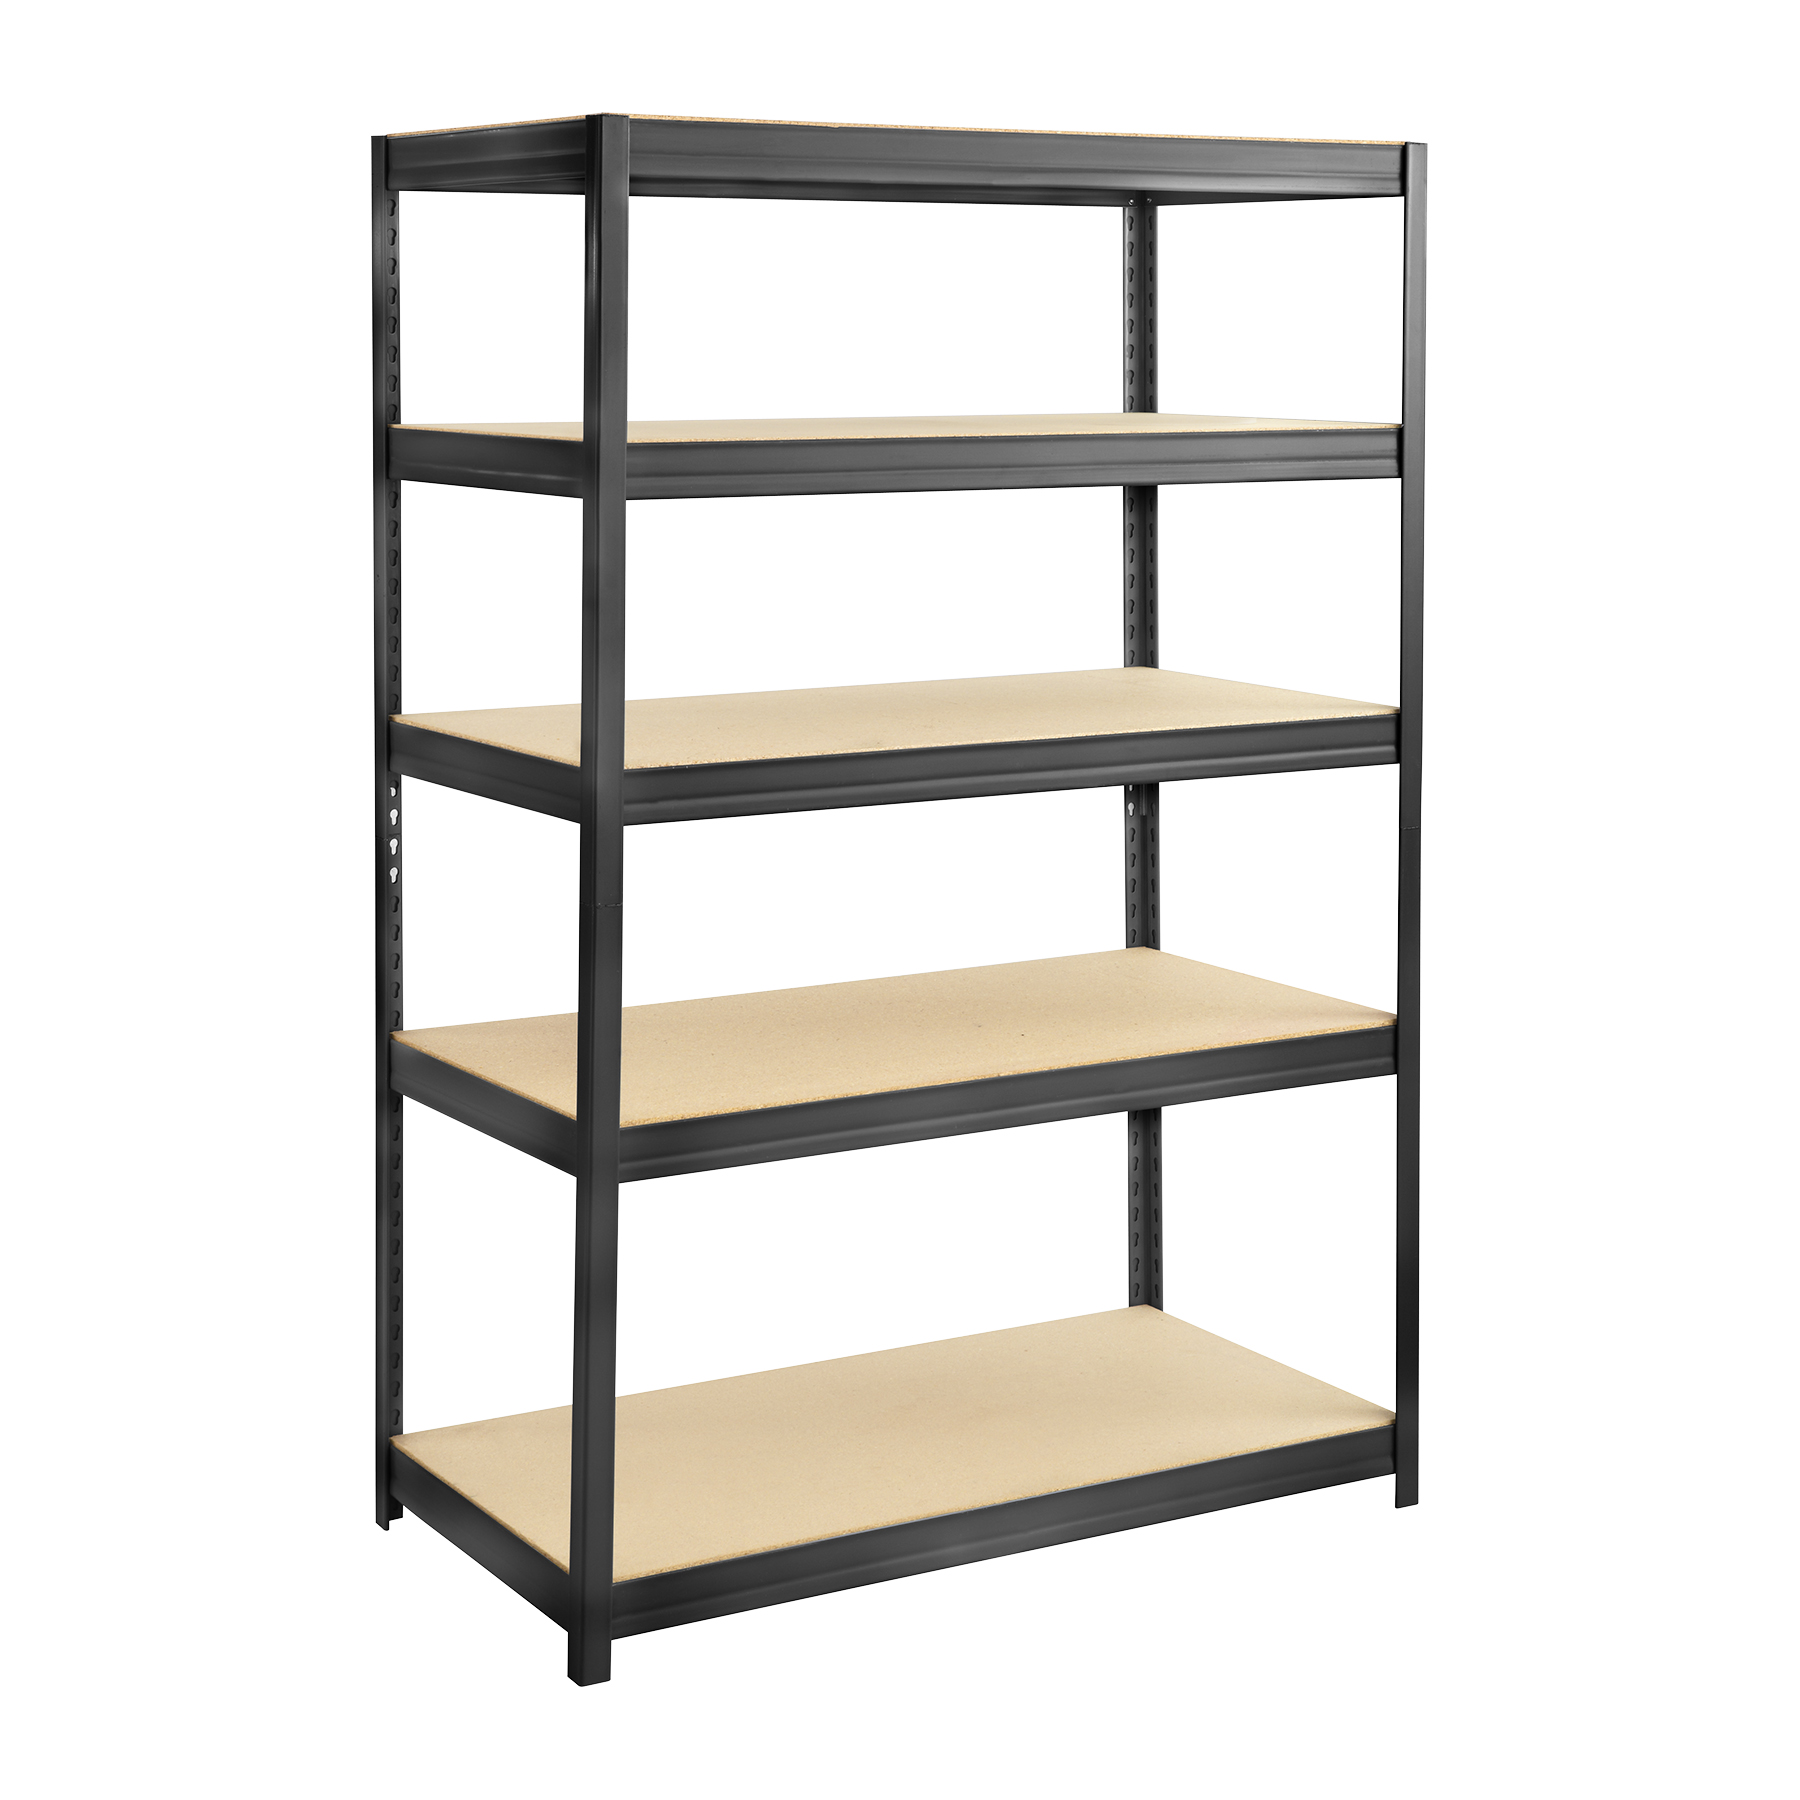 Particleboard Shelving 48x24, How To Assemble Metal Shelving Boltless